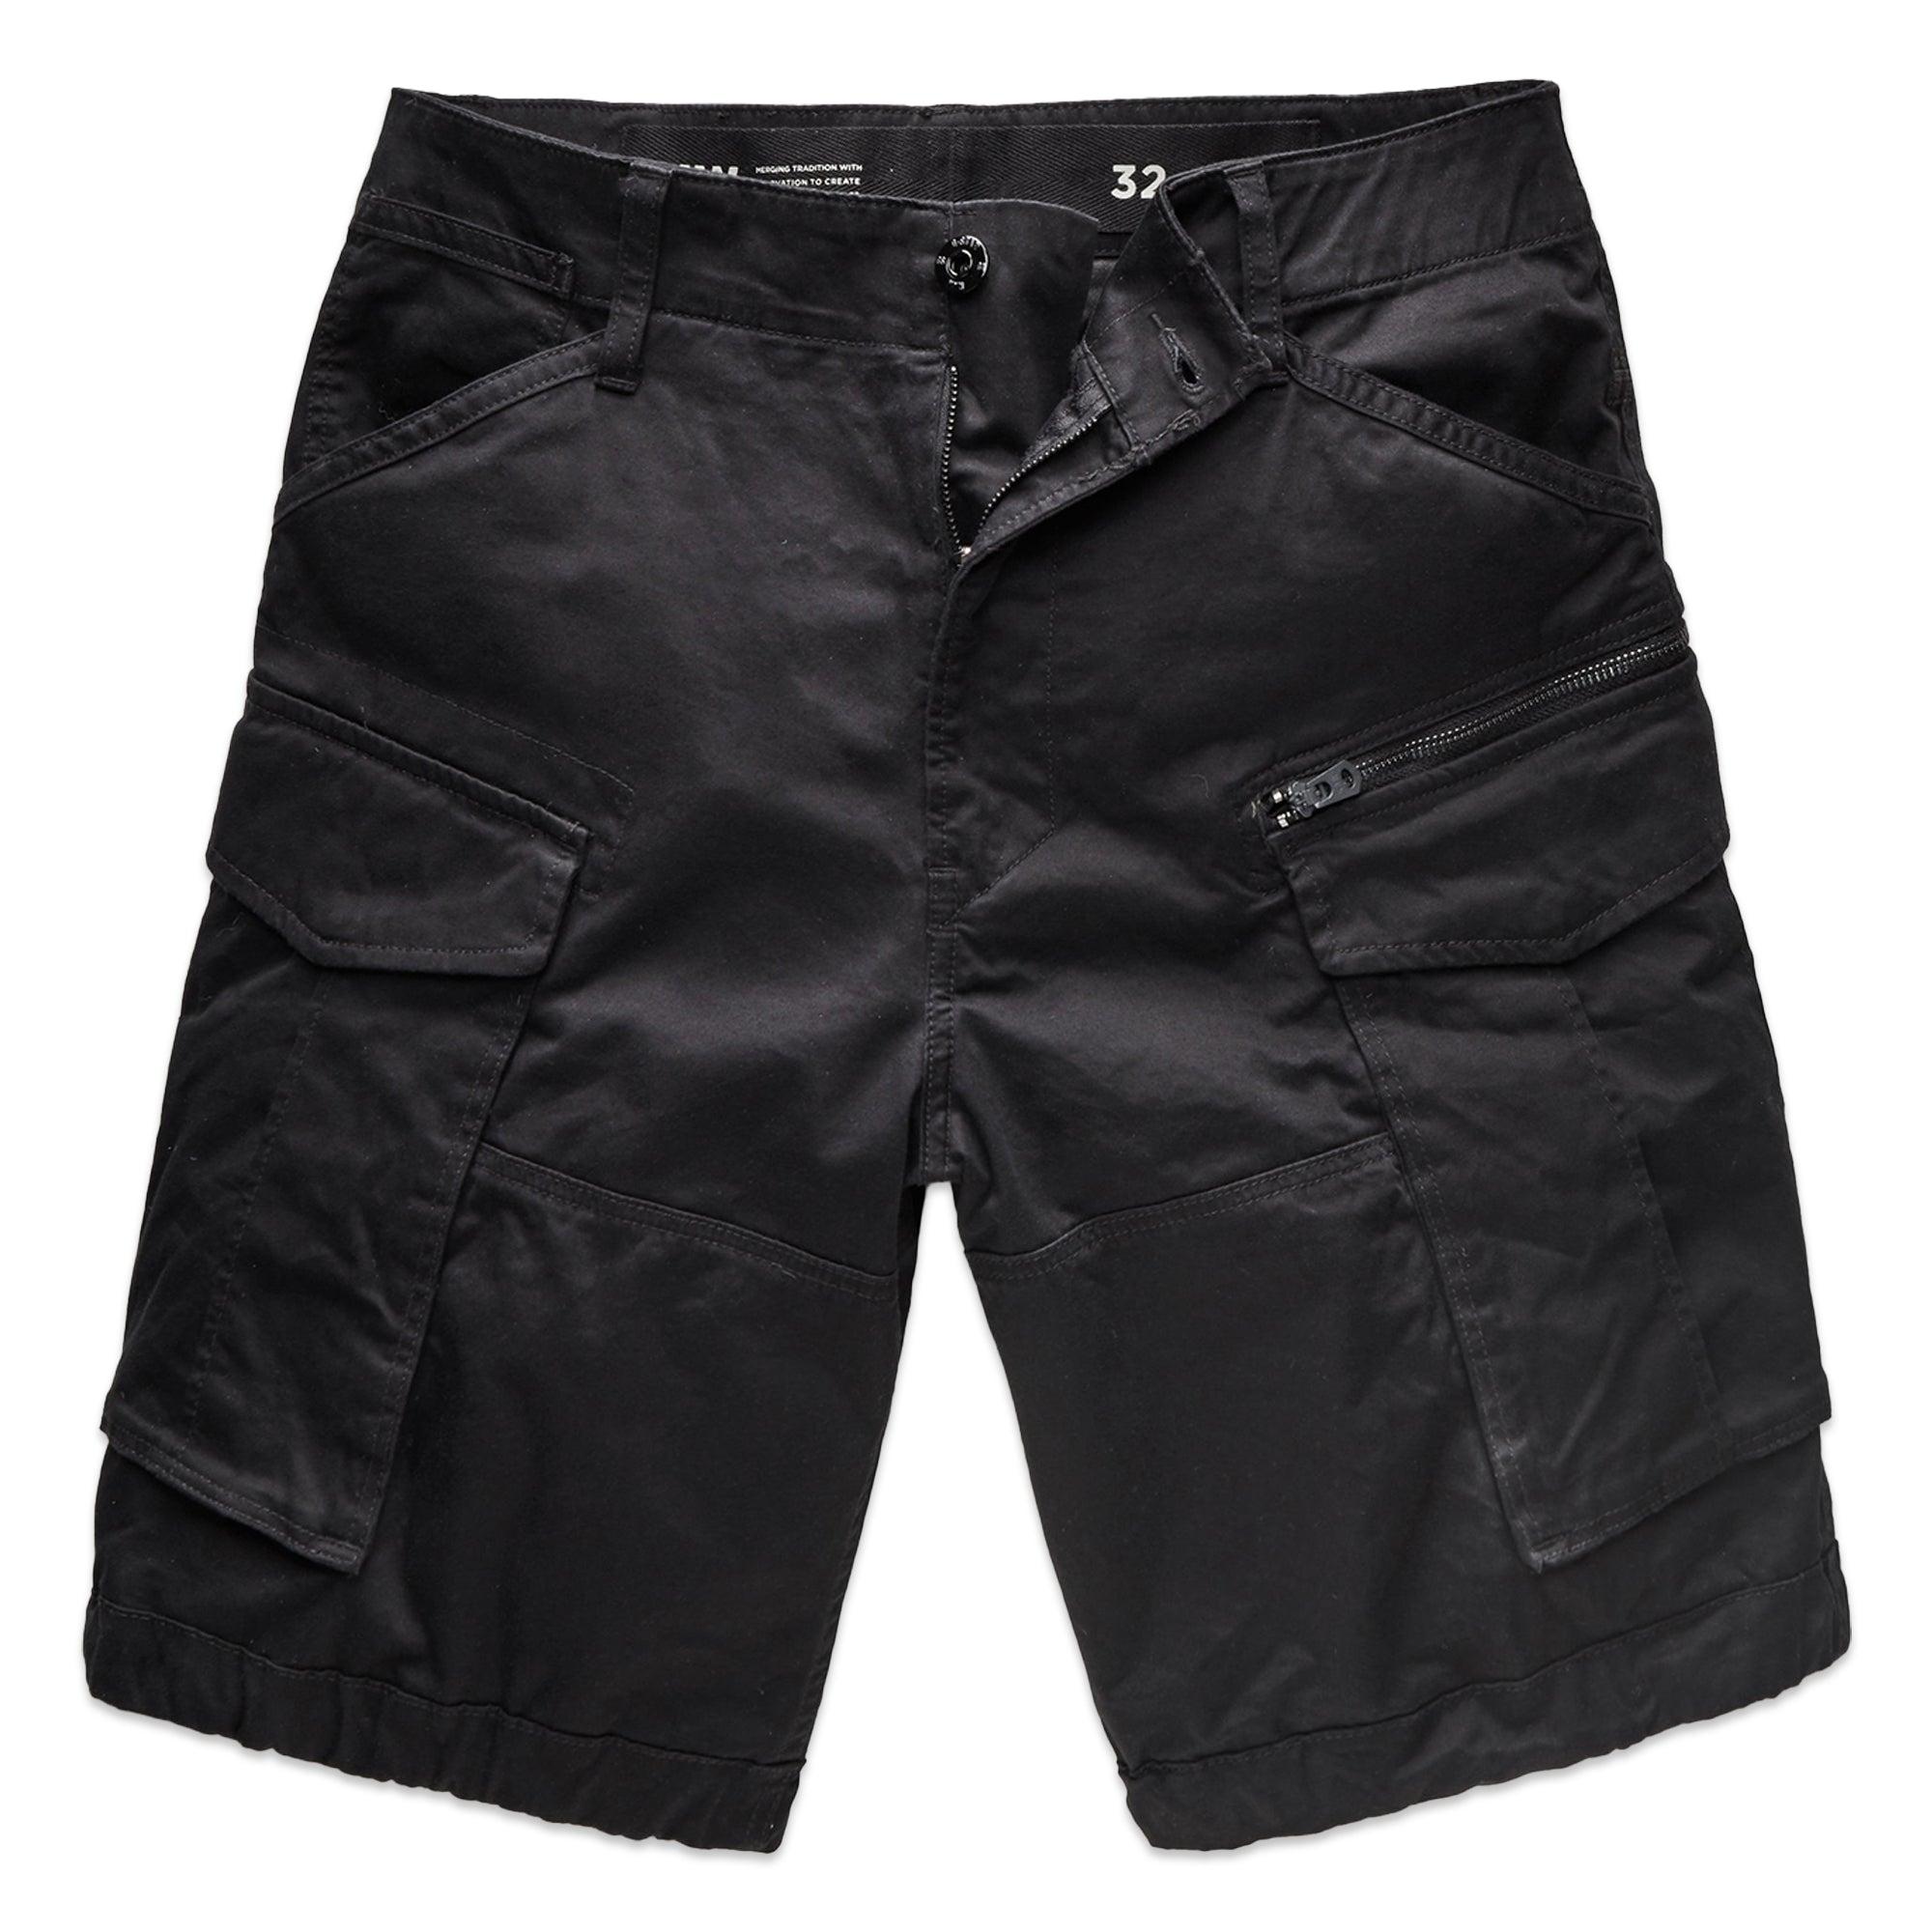 G-Star RAW Cotton Rovic Zip Relaxed Cargo Shorts in Black for Men - Save 4%  | Lyst